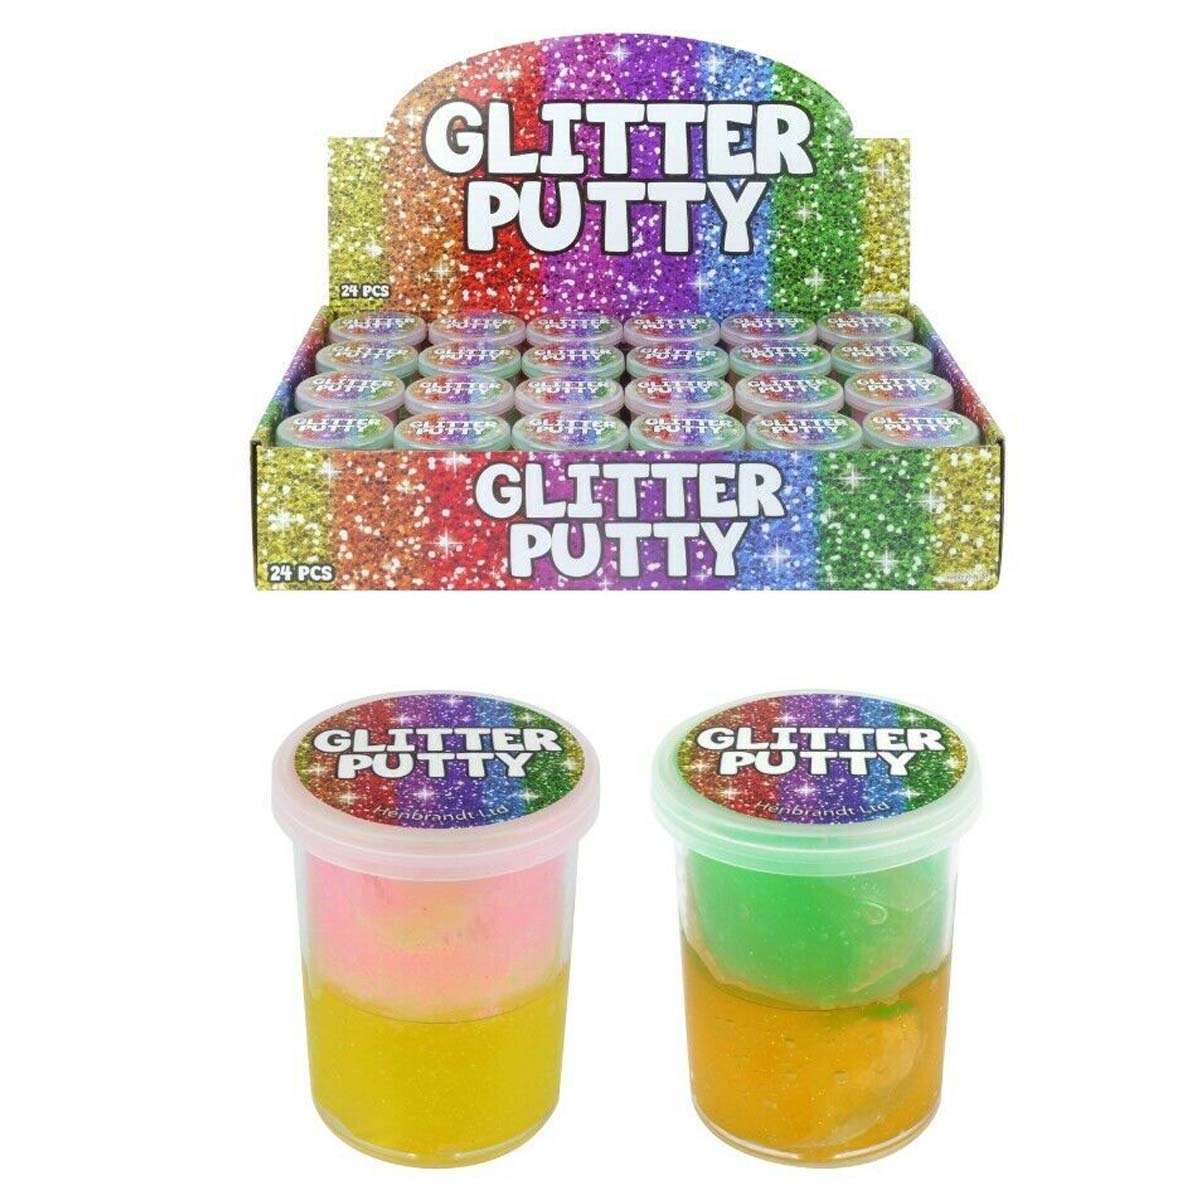 Glitter Putty - Stress Relief Toy - 1pcs - Continental Food Store